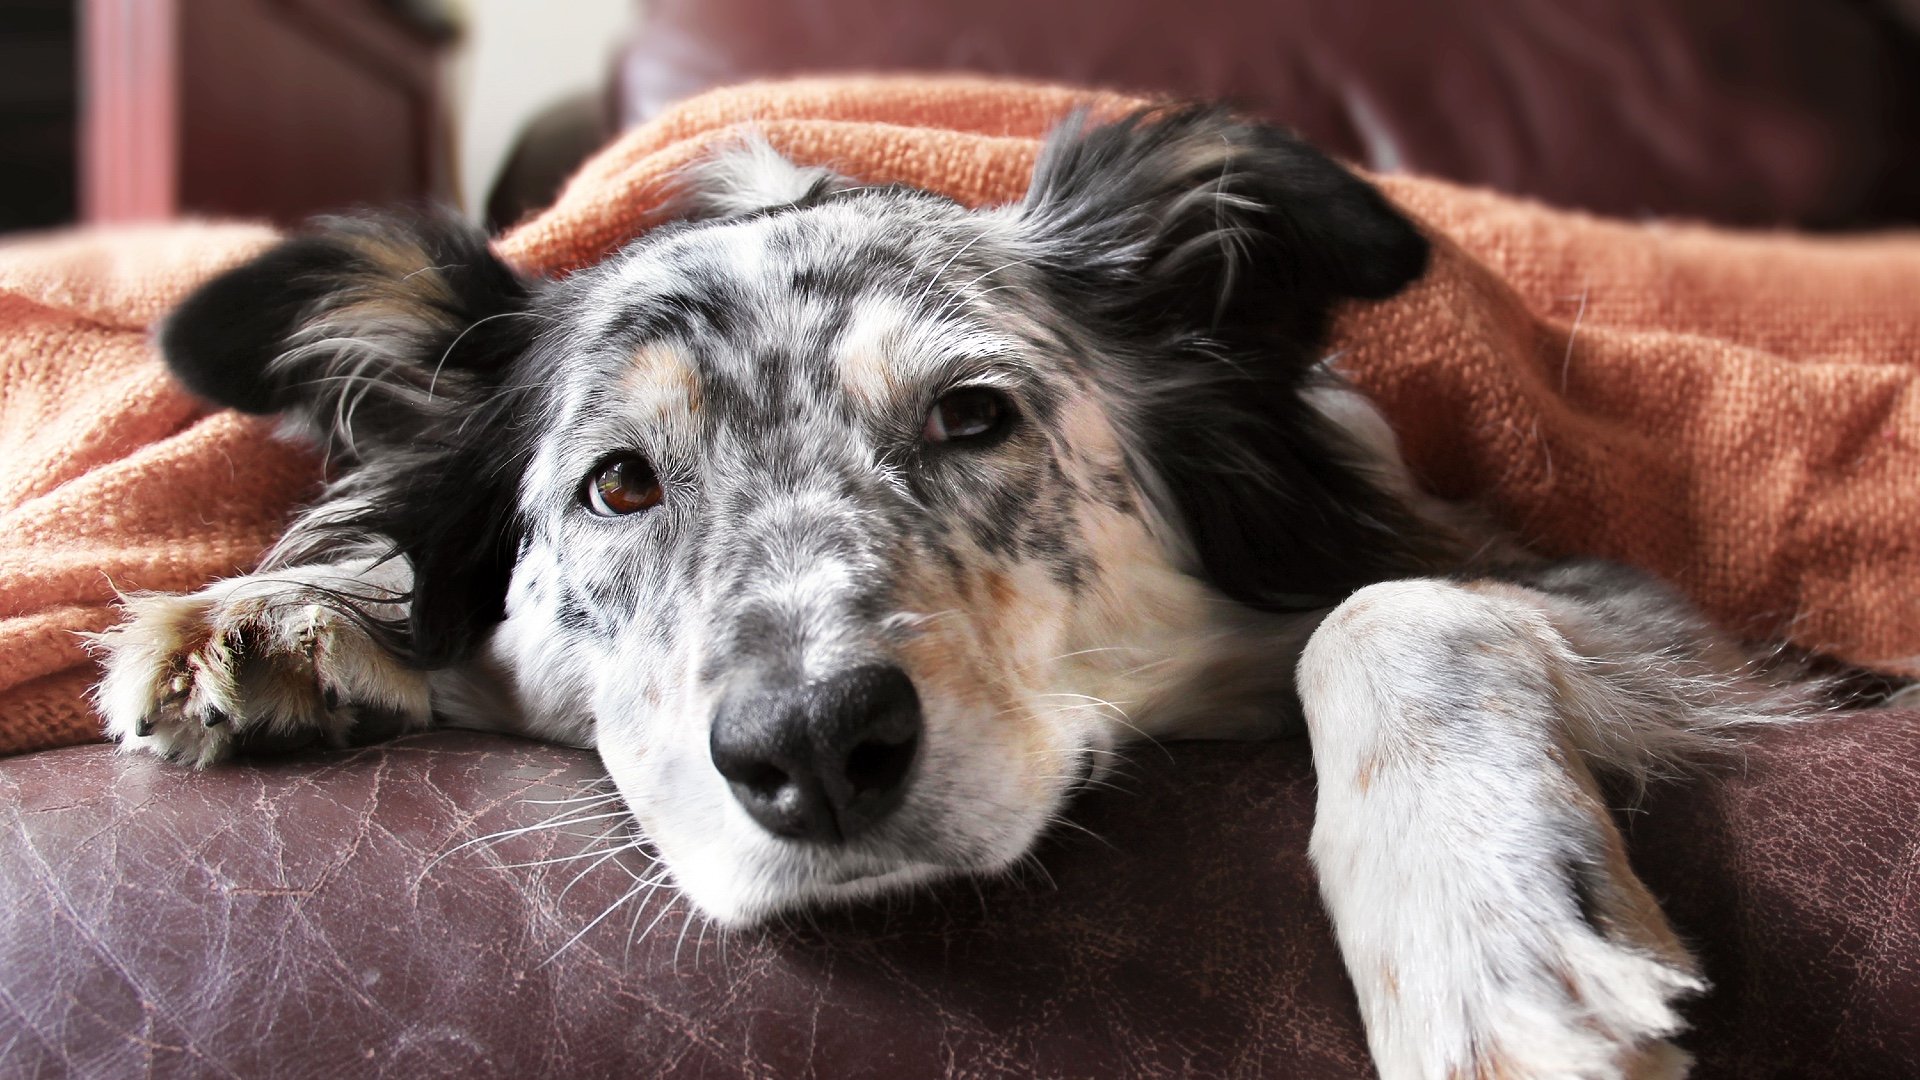 11 things to check when your dog is not eating, according to a trained vet